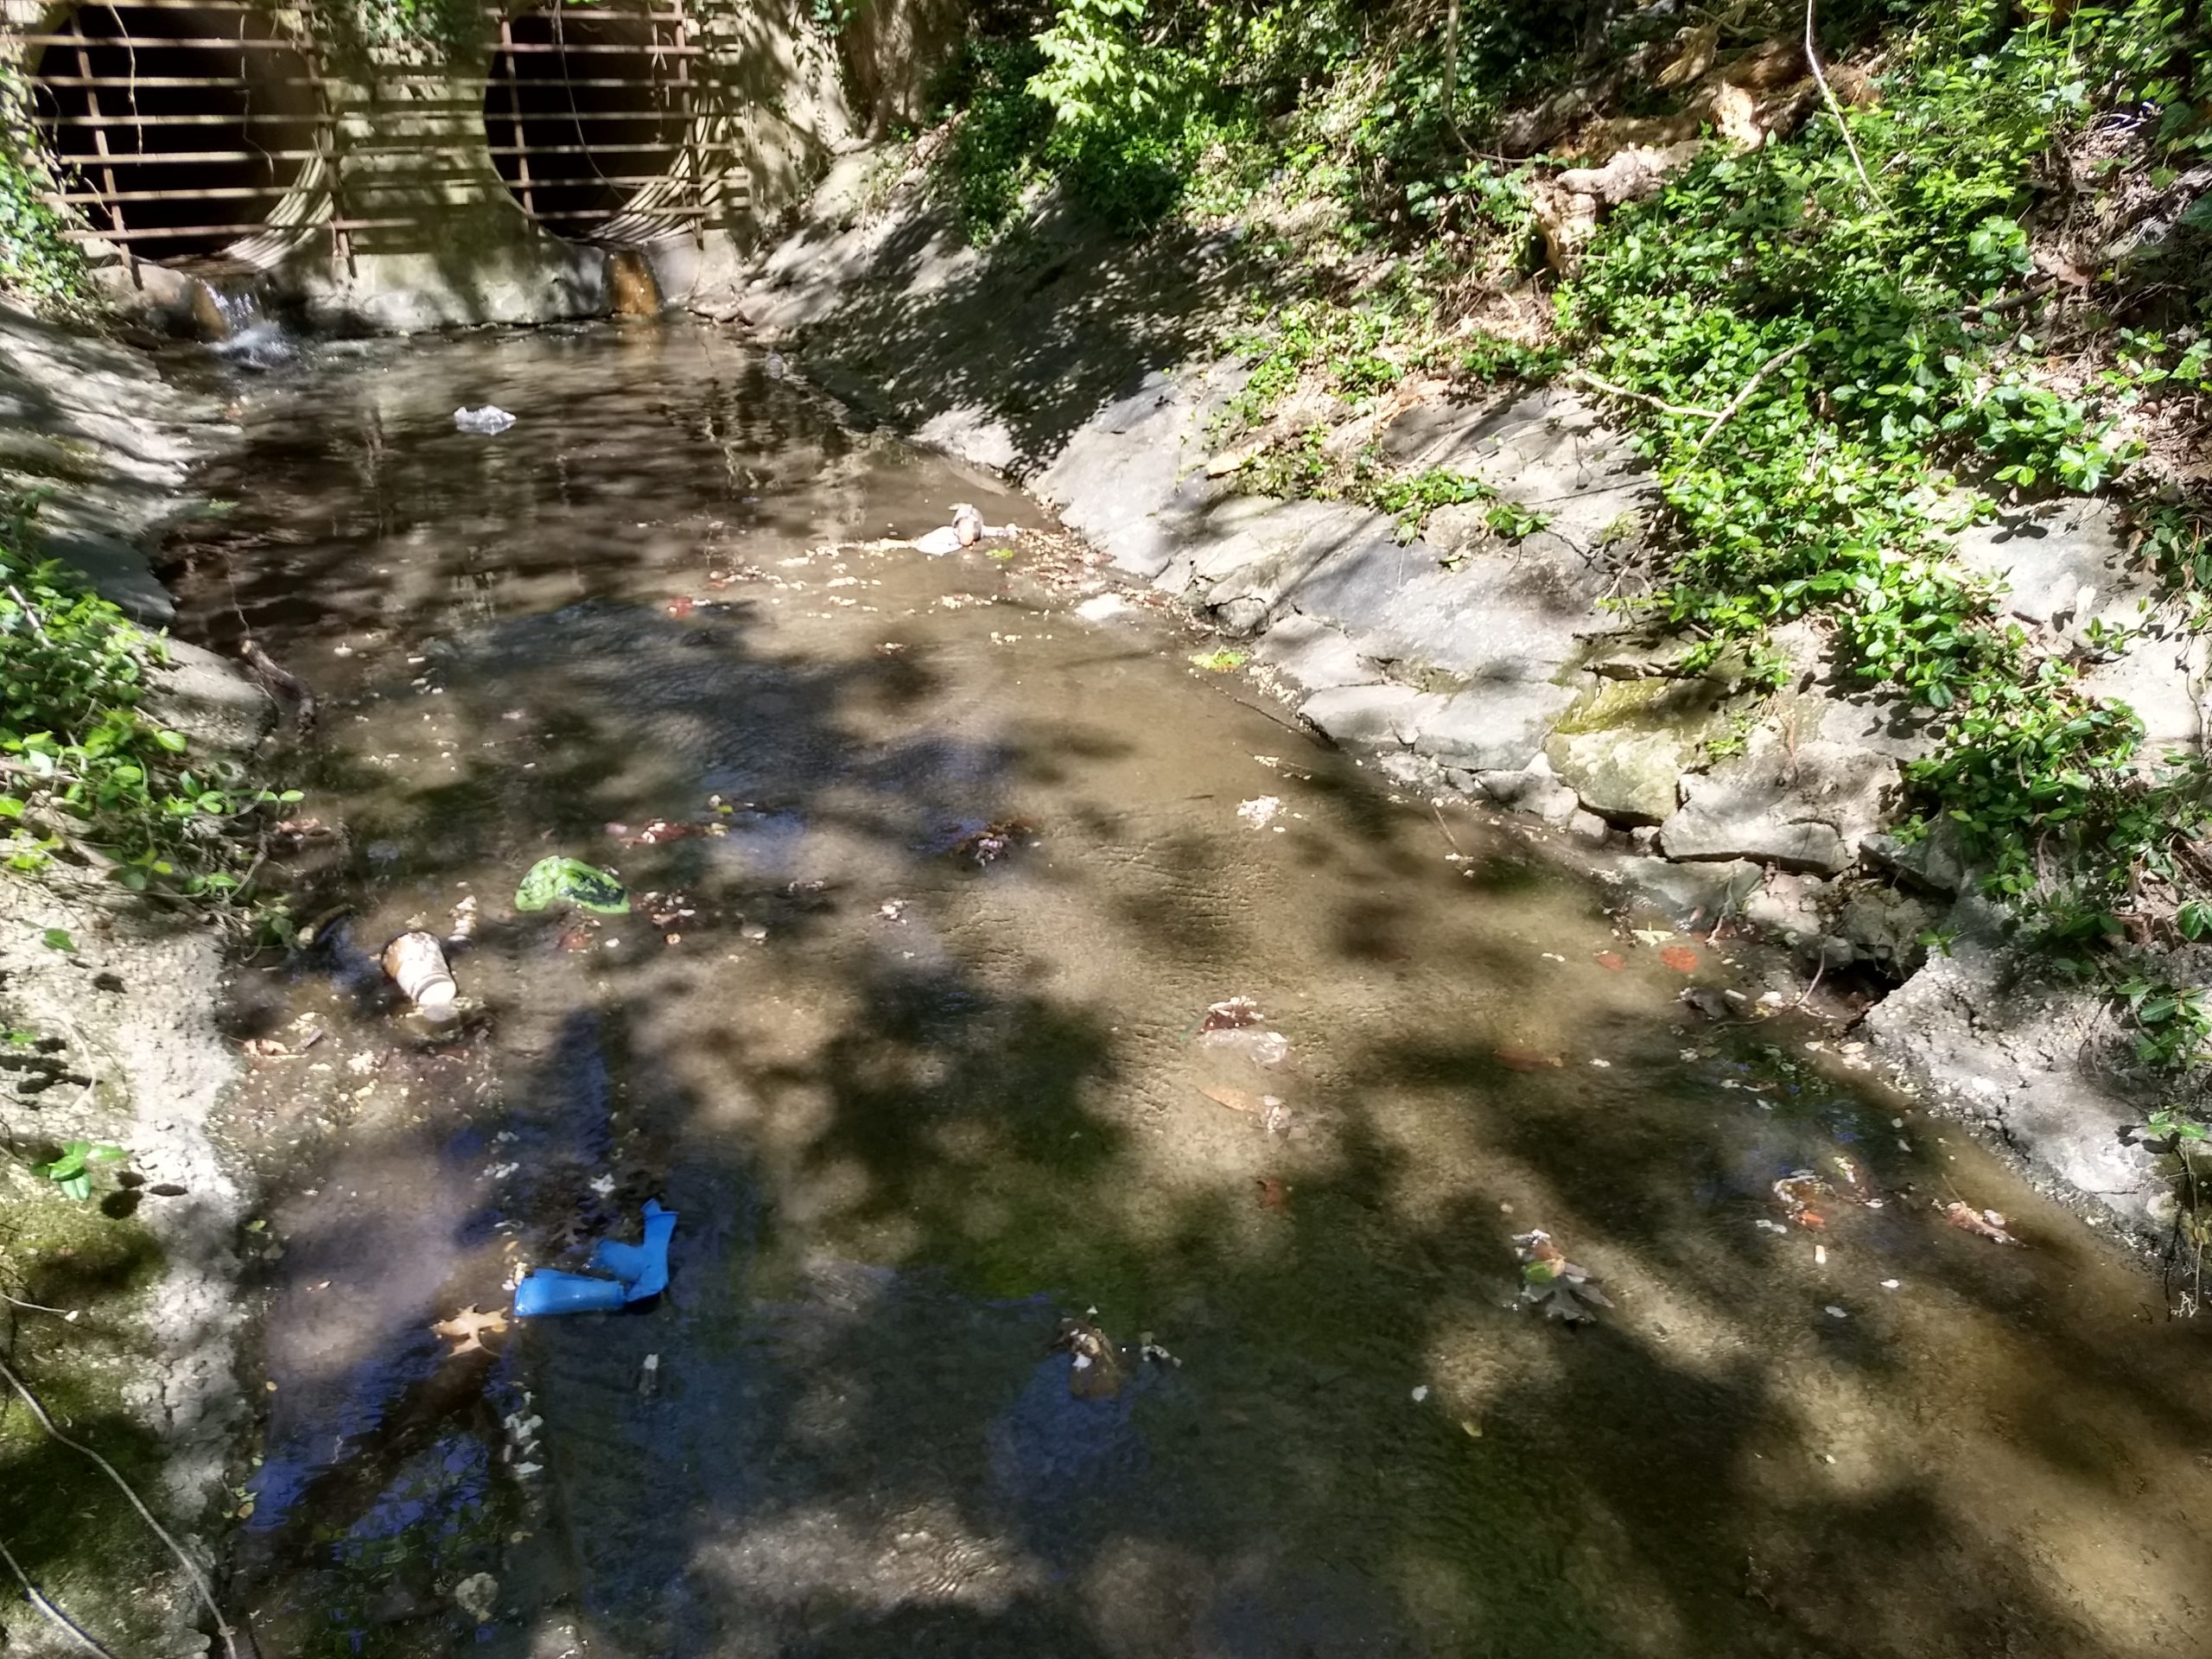 Bennington Drive water quality testing site with sometrash visible in the water.